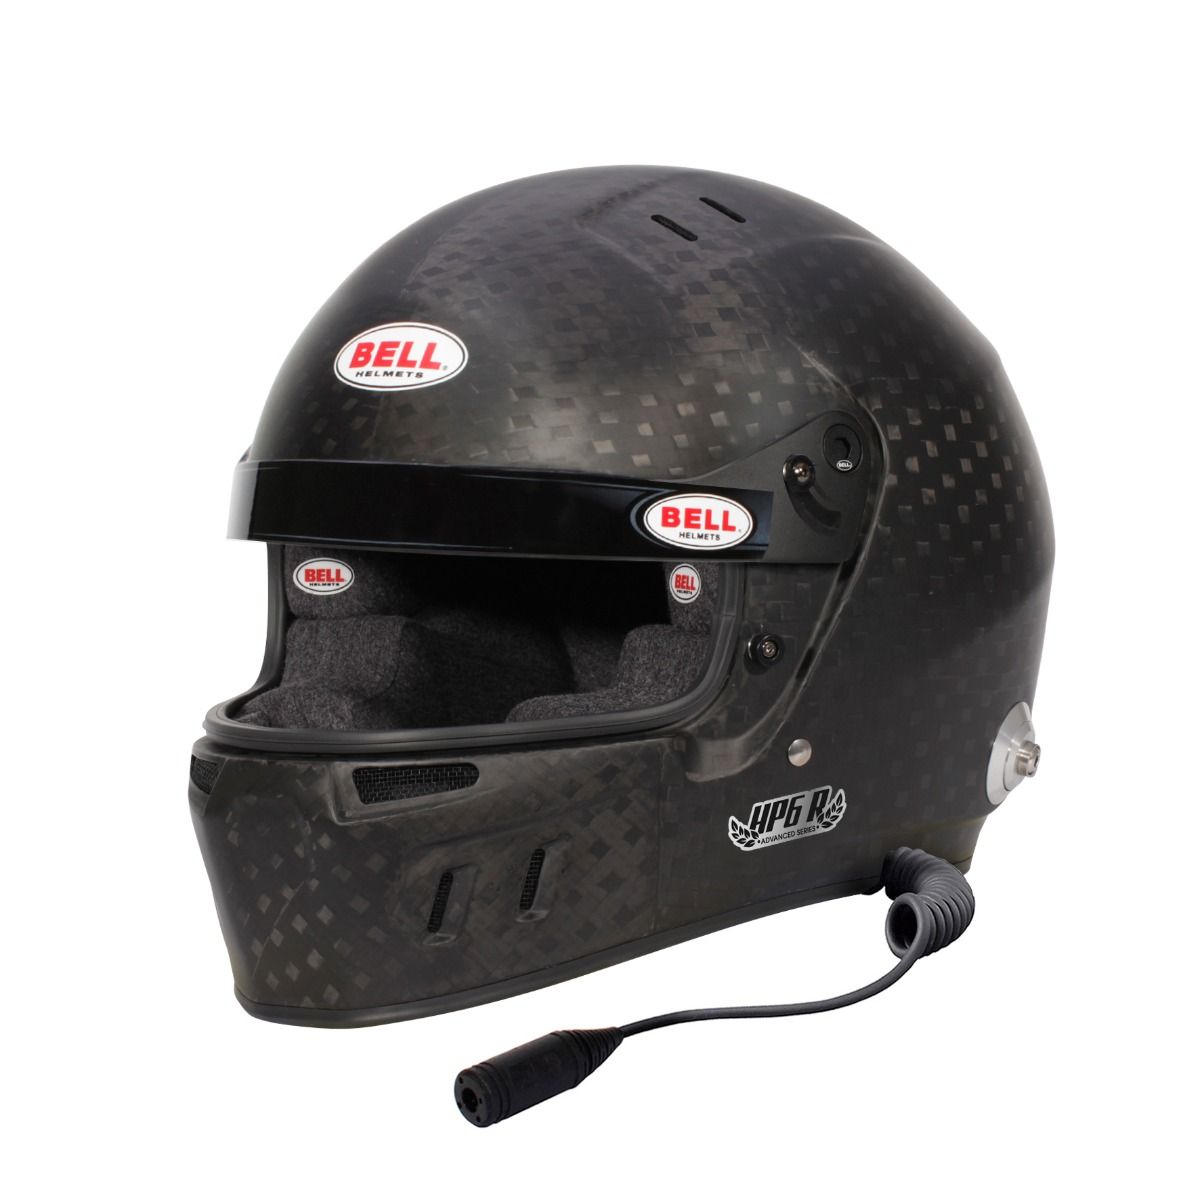 ᐉ BELL 1140138 Rally Racing helmet full-face HP6 HANS FIA 8860-2018, size  61 (7 5/8) carbon